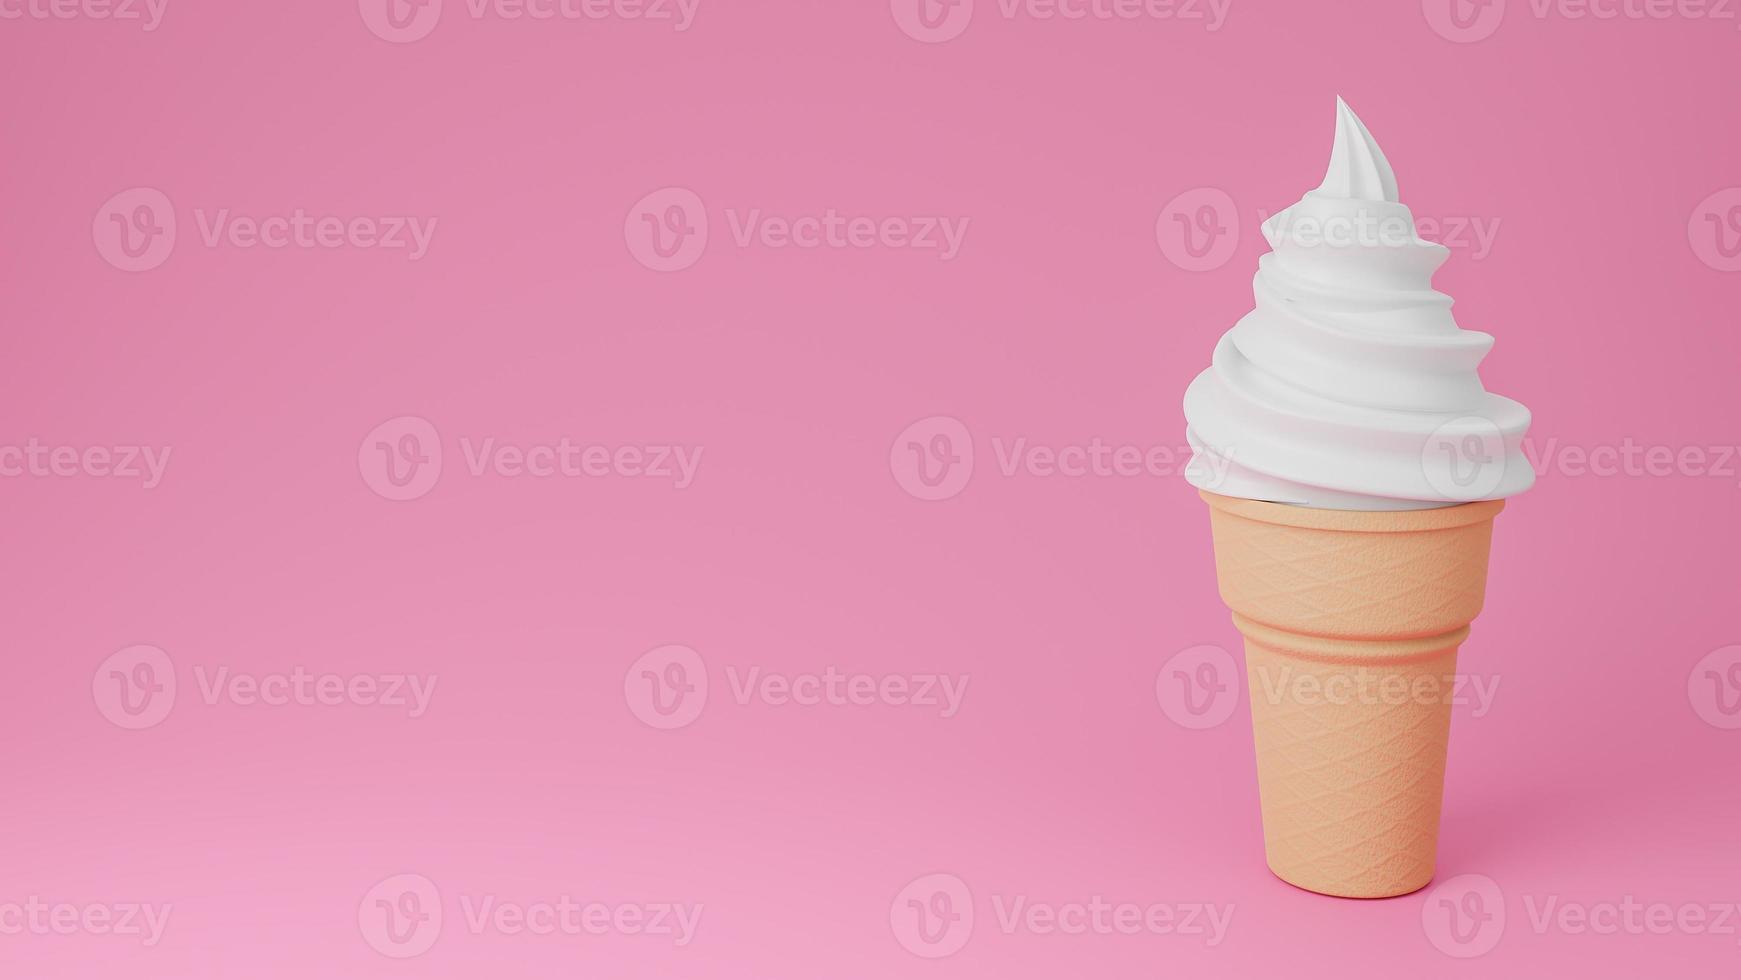 Soft serve ice cream of vanilla or milk flavours on crispy cone on pink background.,3d model and illustration. photo